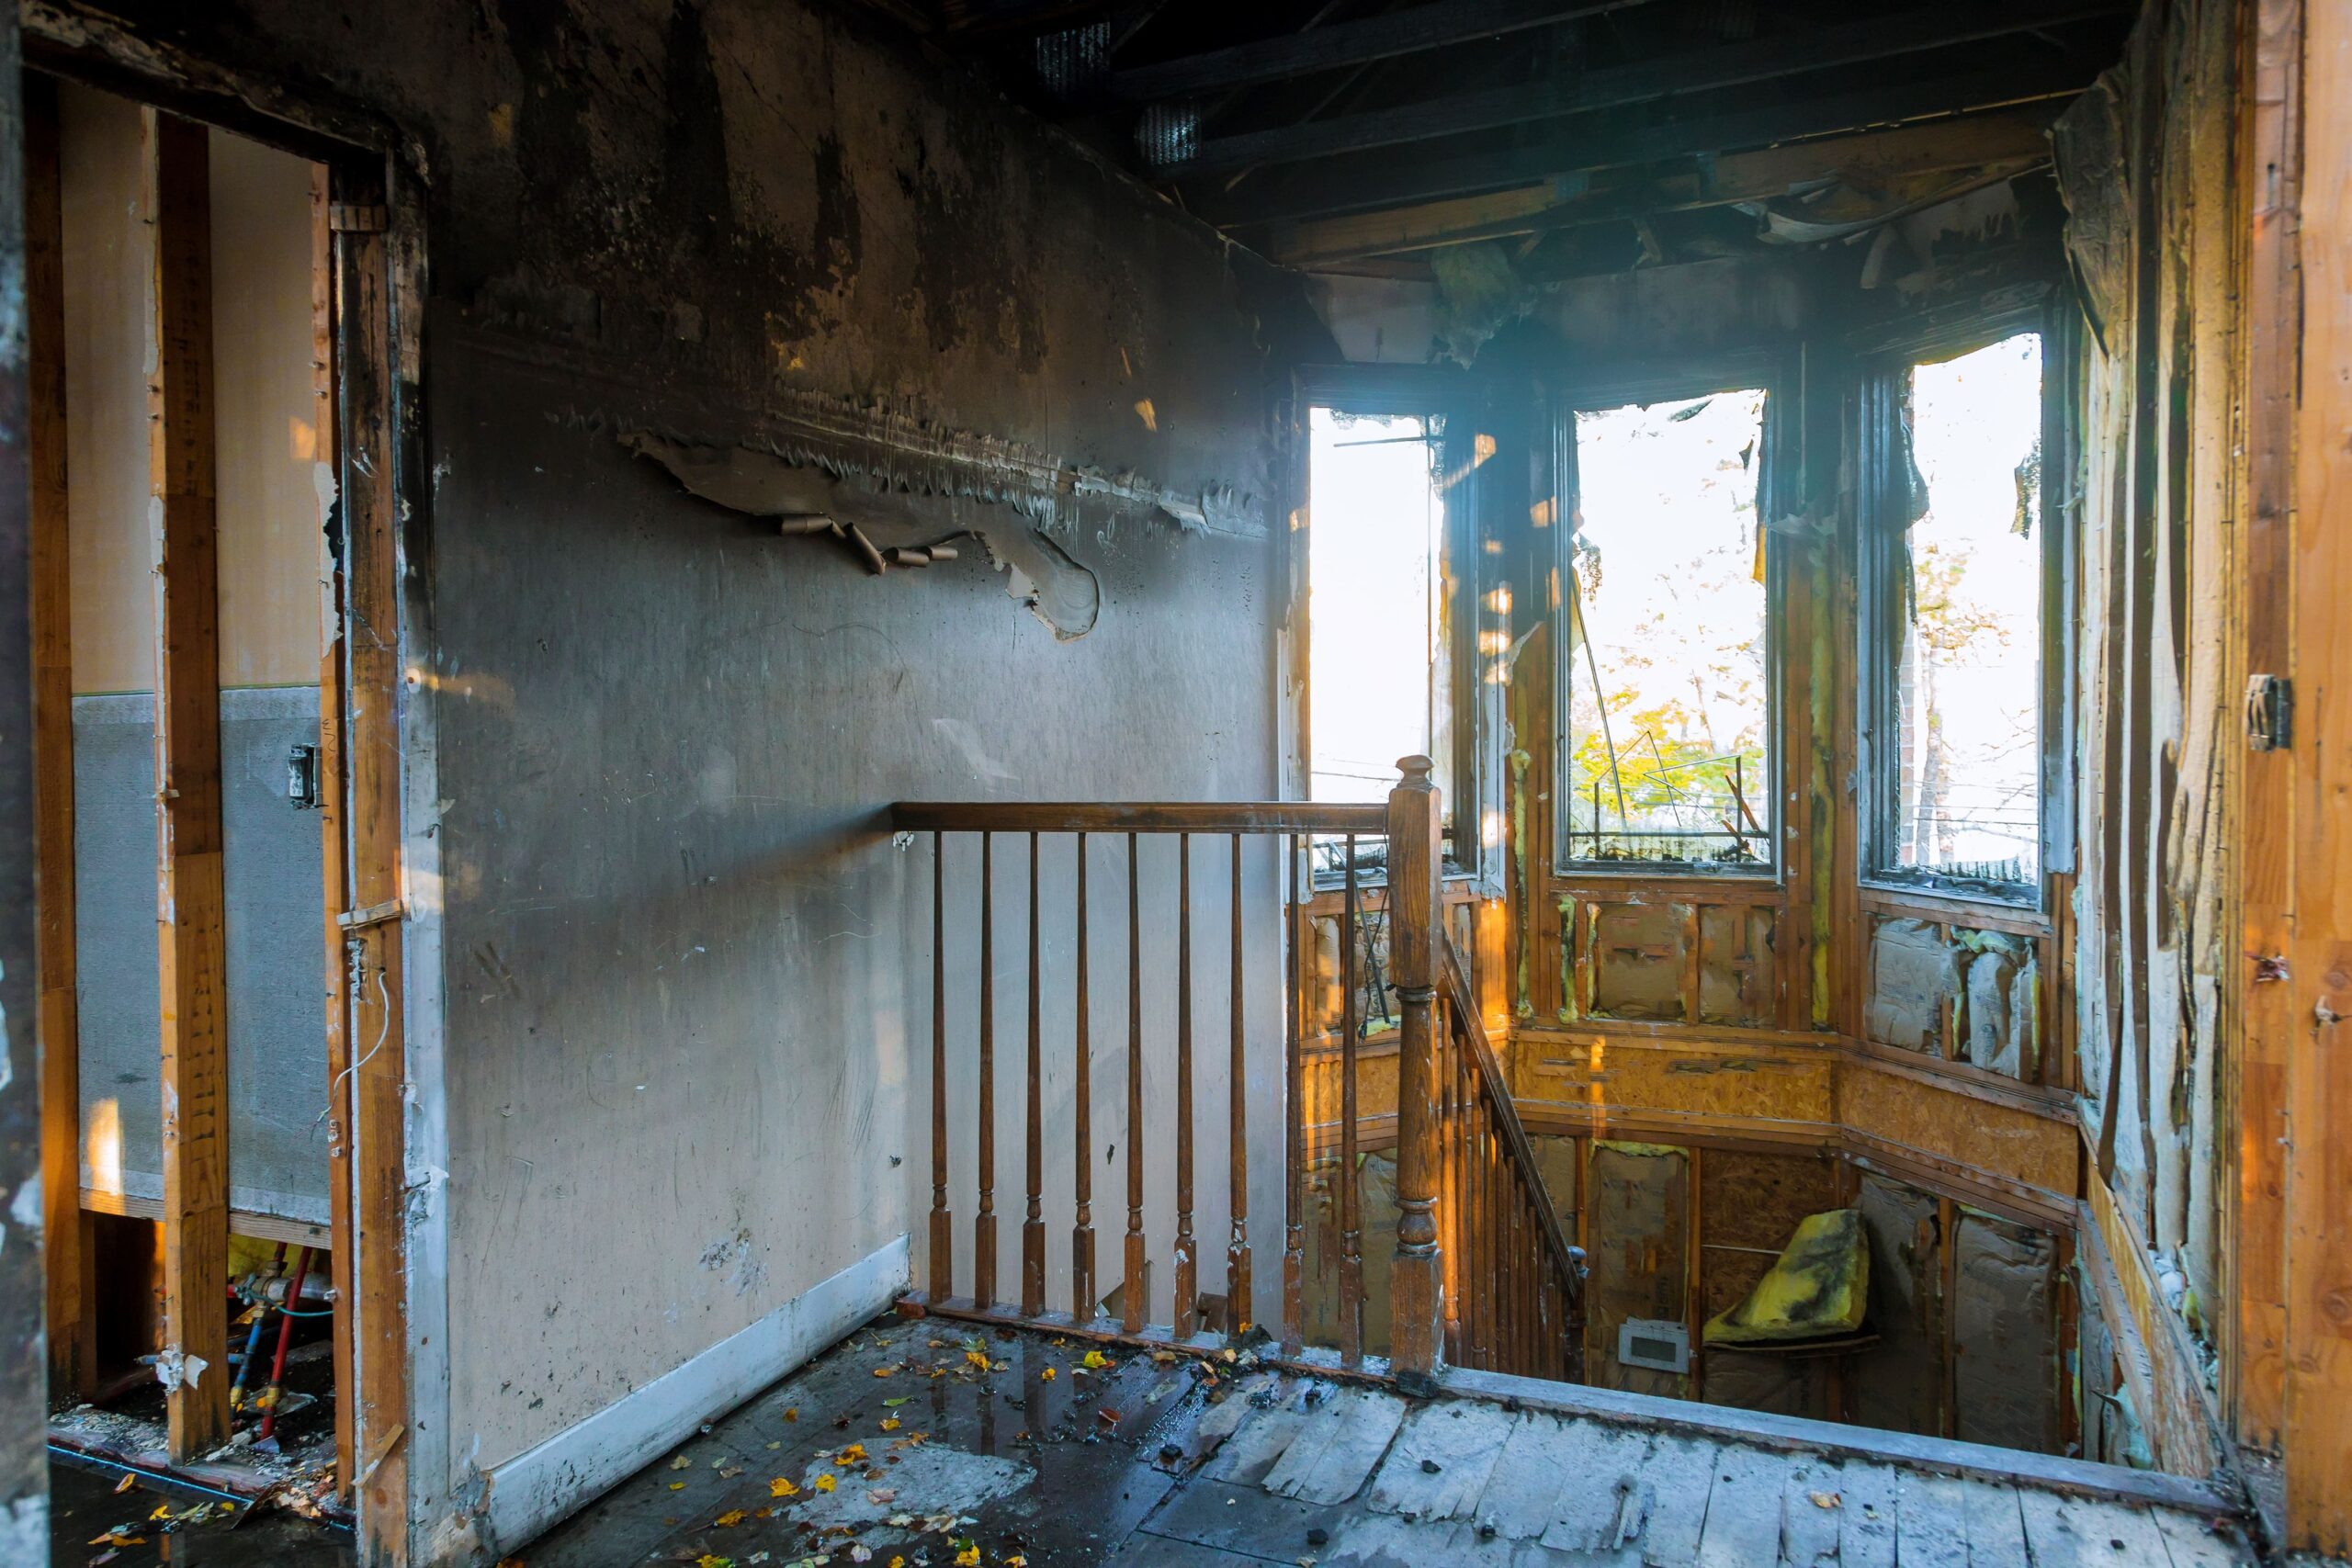 burned down interior of a home after a fire